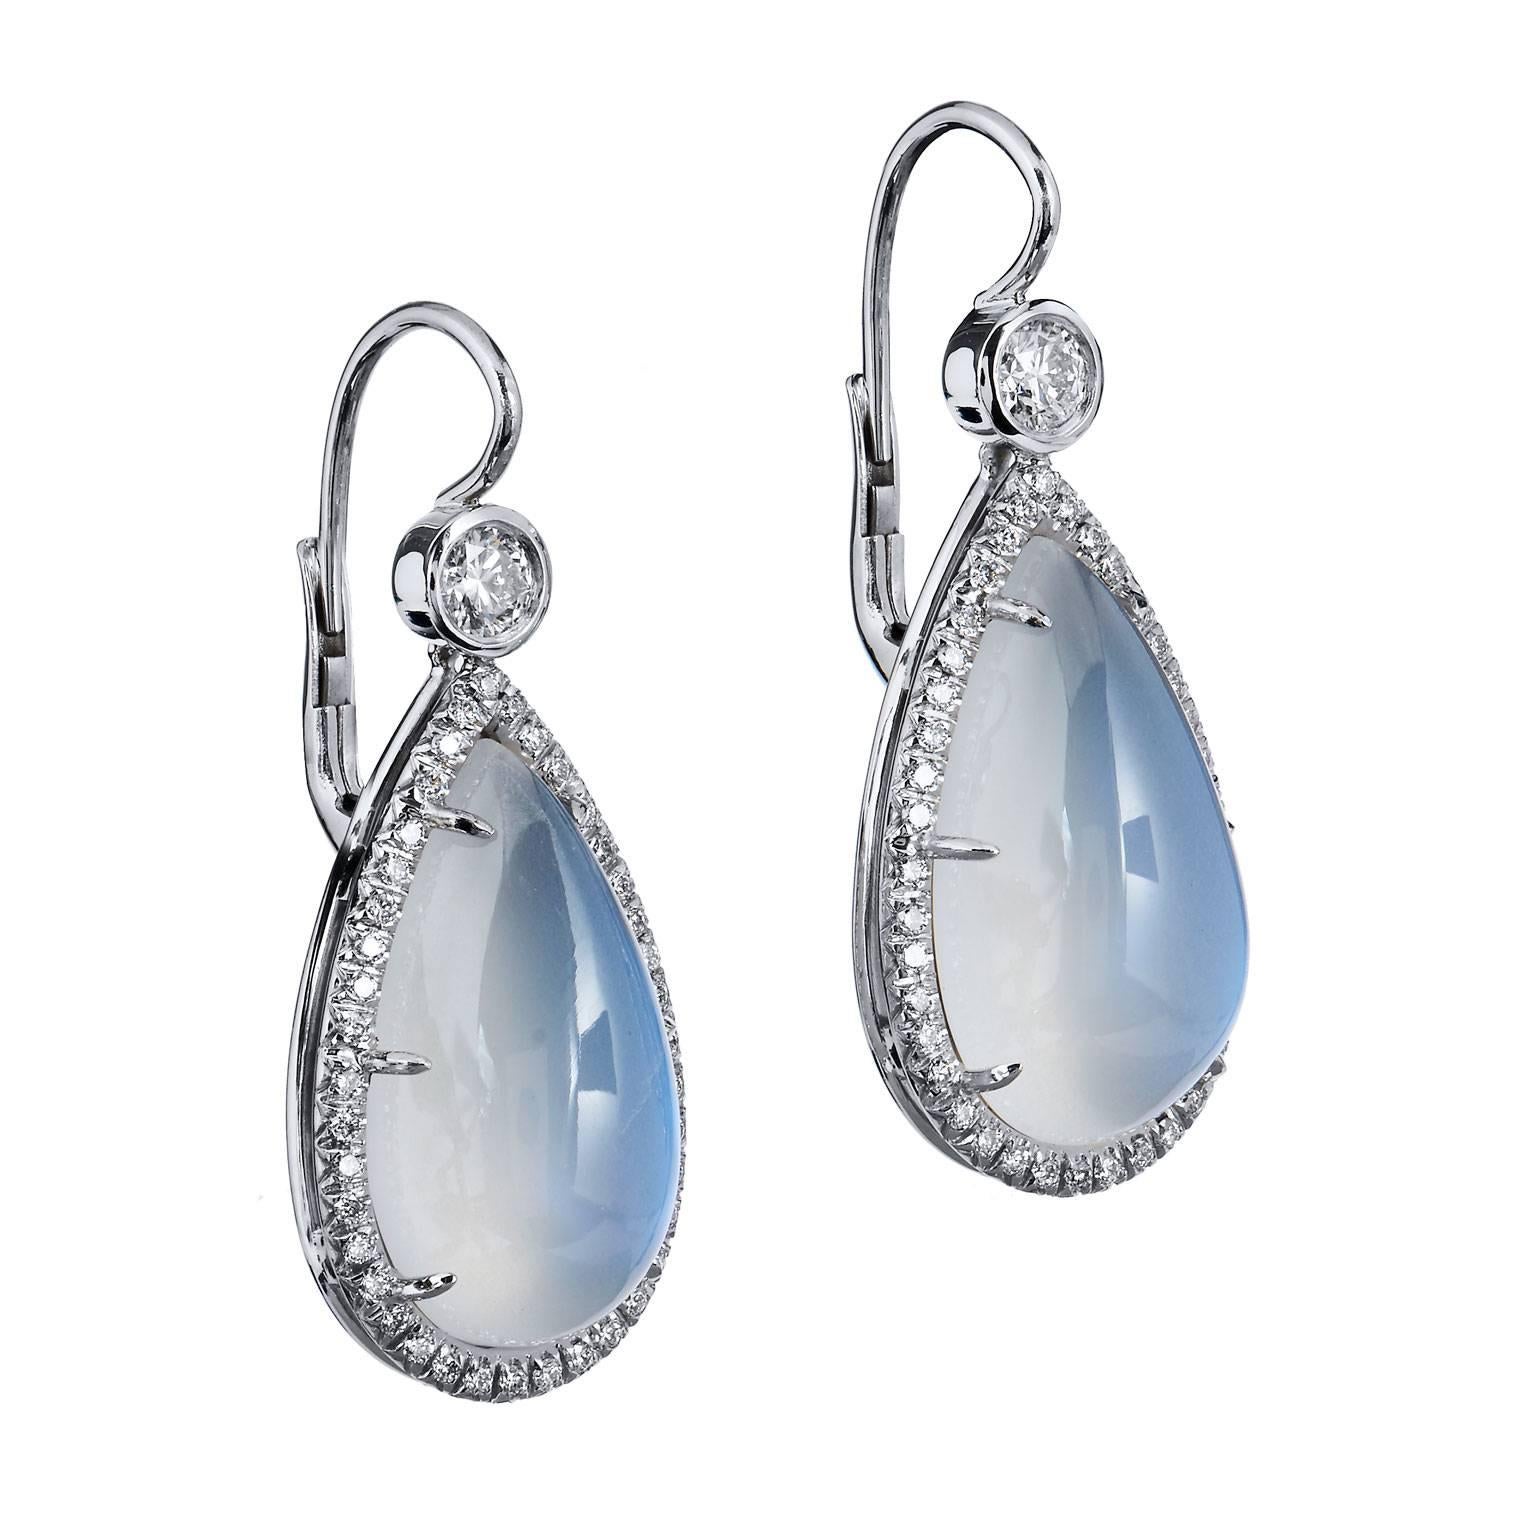 Mysterious  19 x 10 x 7 MM Earring  with Moonstones weighing 18.02 Carats in opaque Hues of blue and white, set in eighteen karat white gold surrounded by eighty two diamonds weighing .73 carats. French clips will hold the earring comfortably on